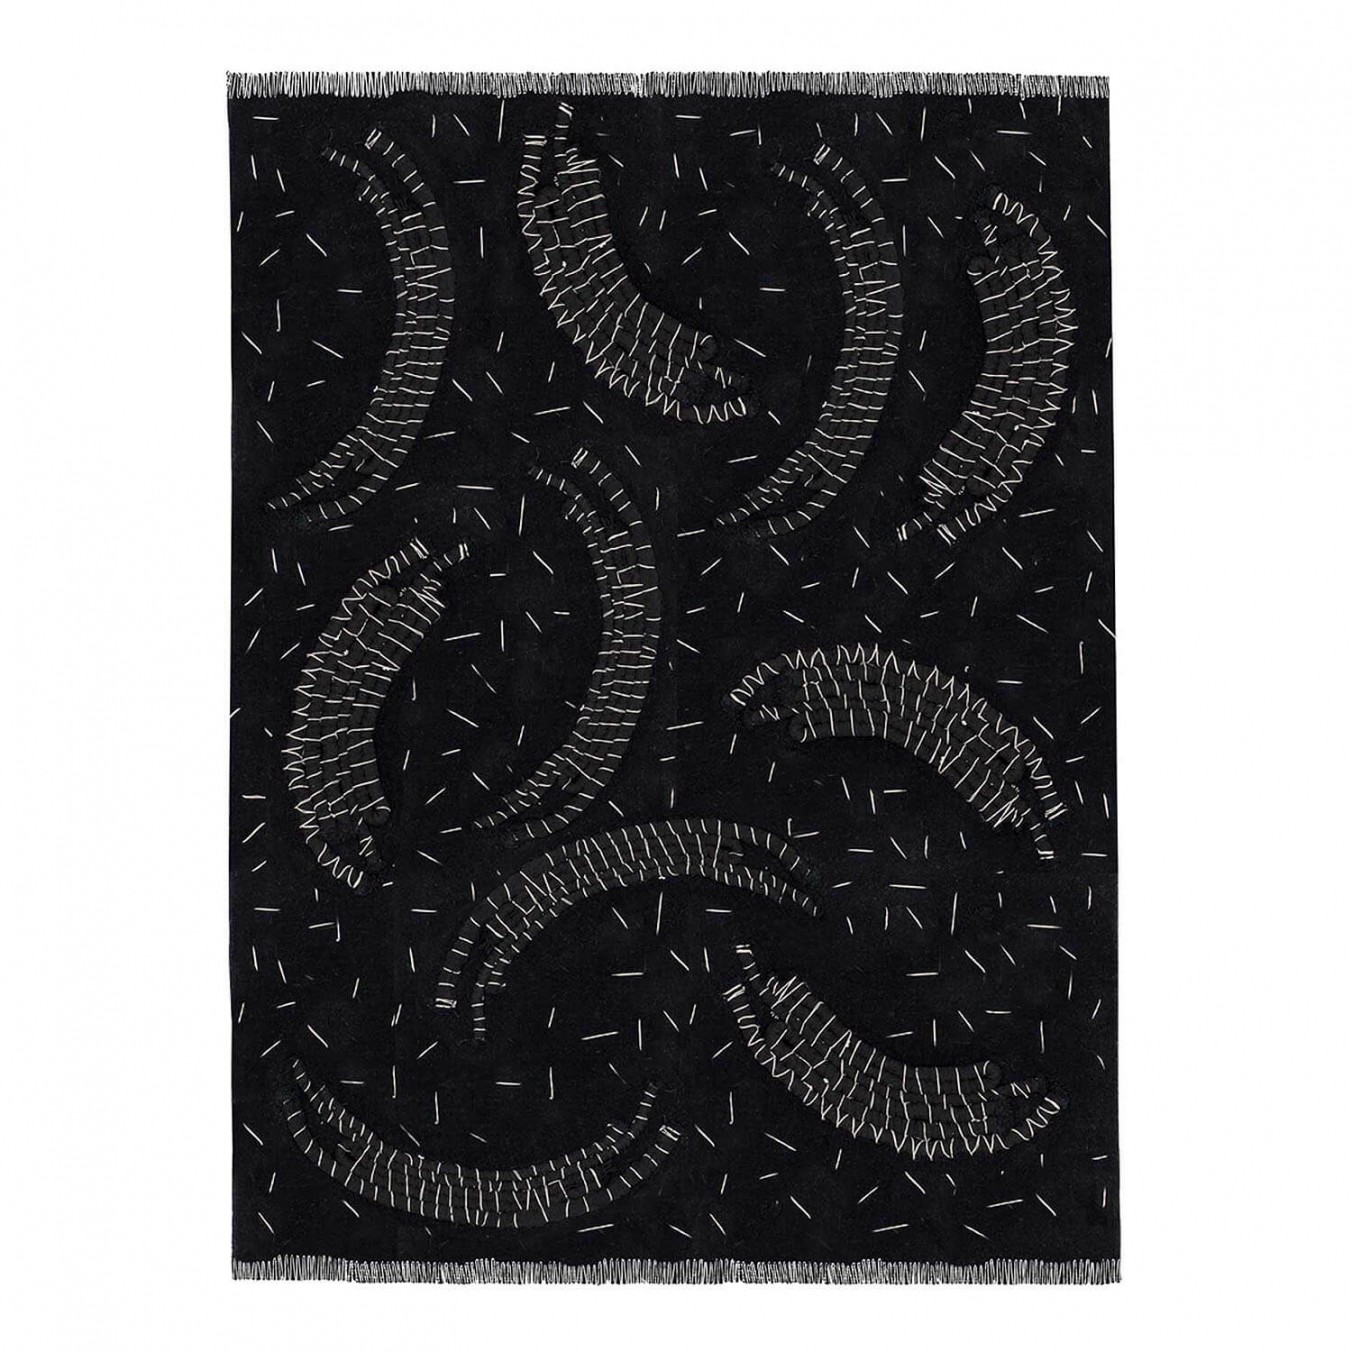 QUILT CHARCOAL